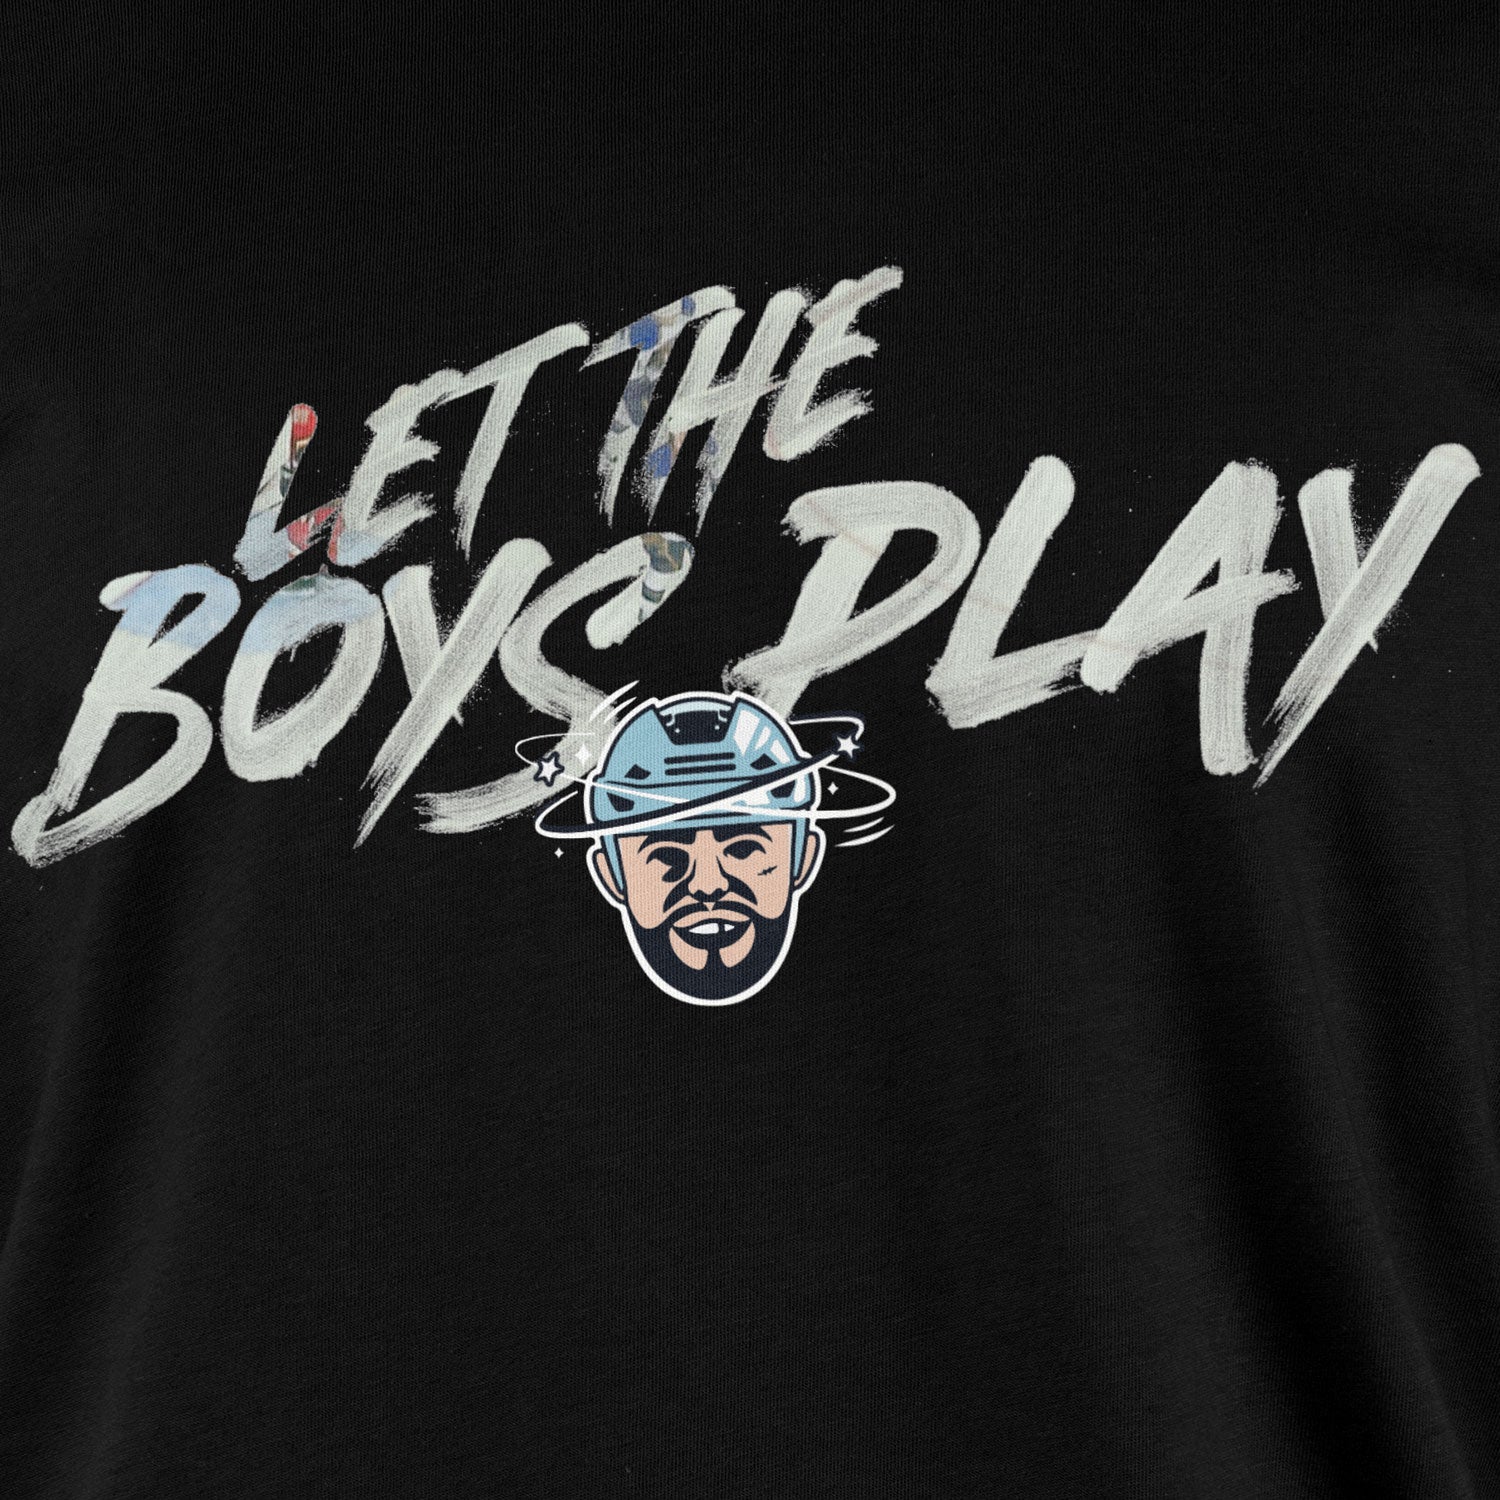 LET THE BOYS PLAY